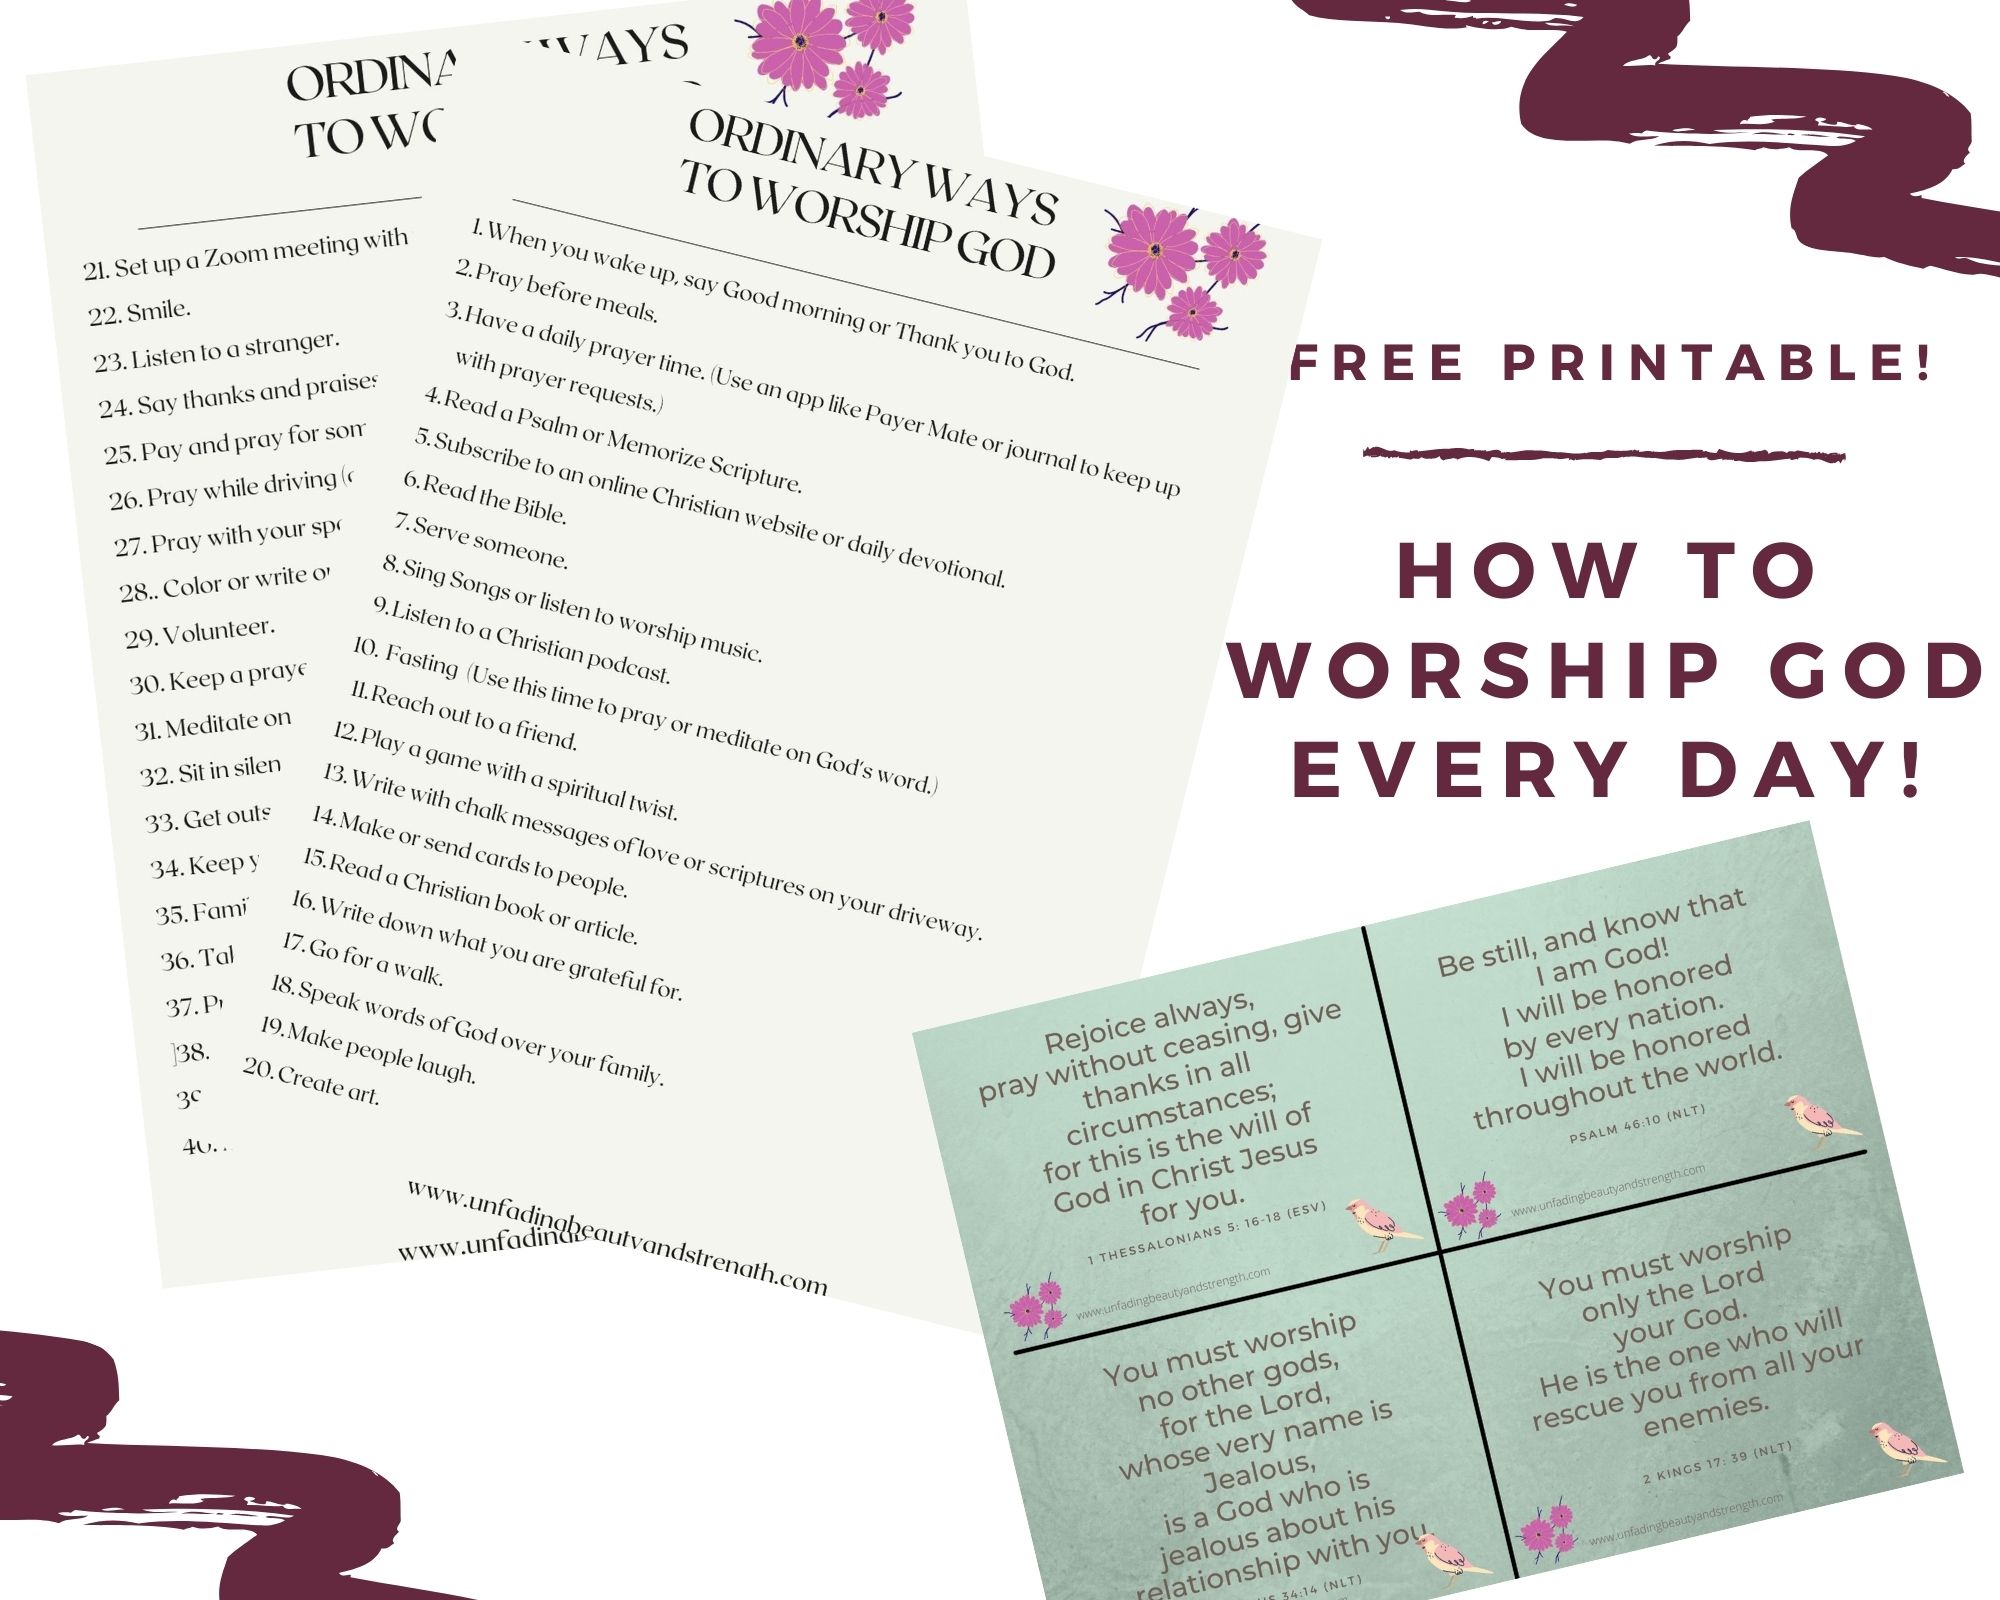 Free Printable: How to Worship God Every Day